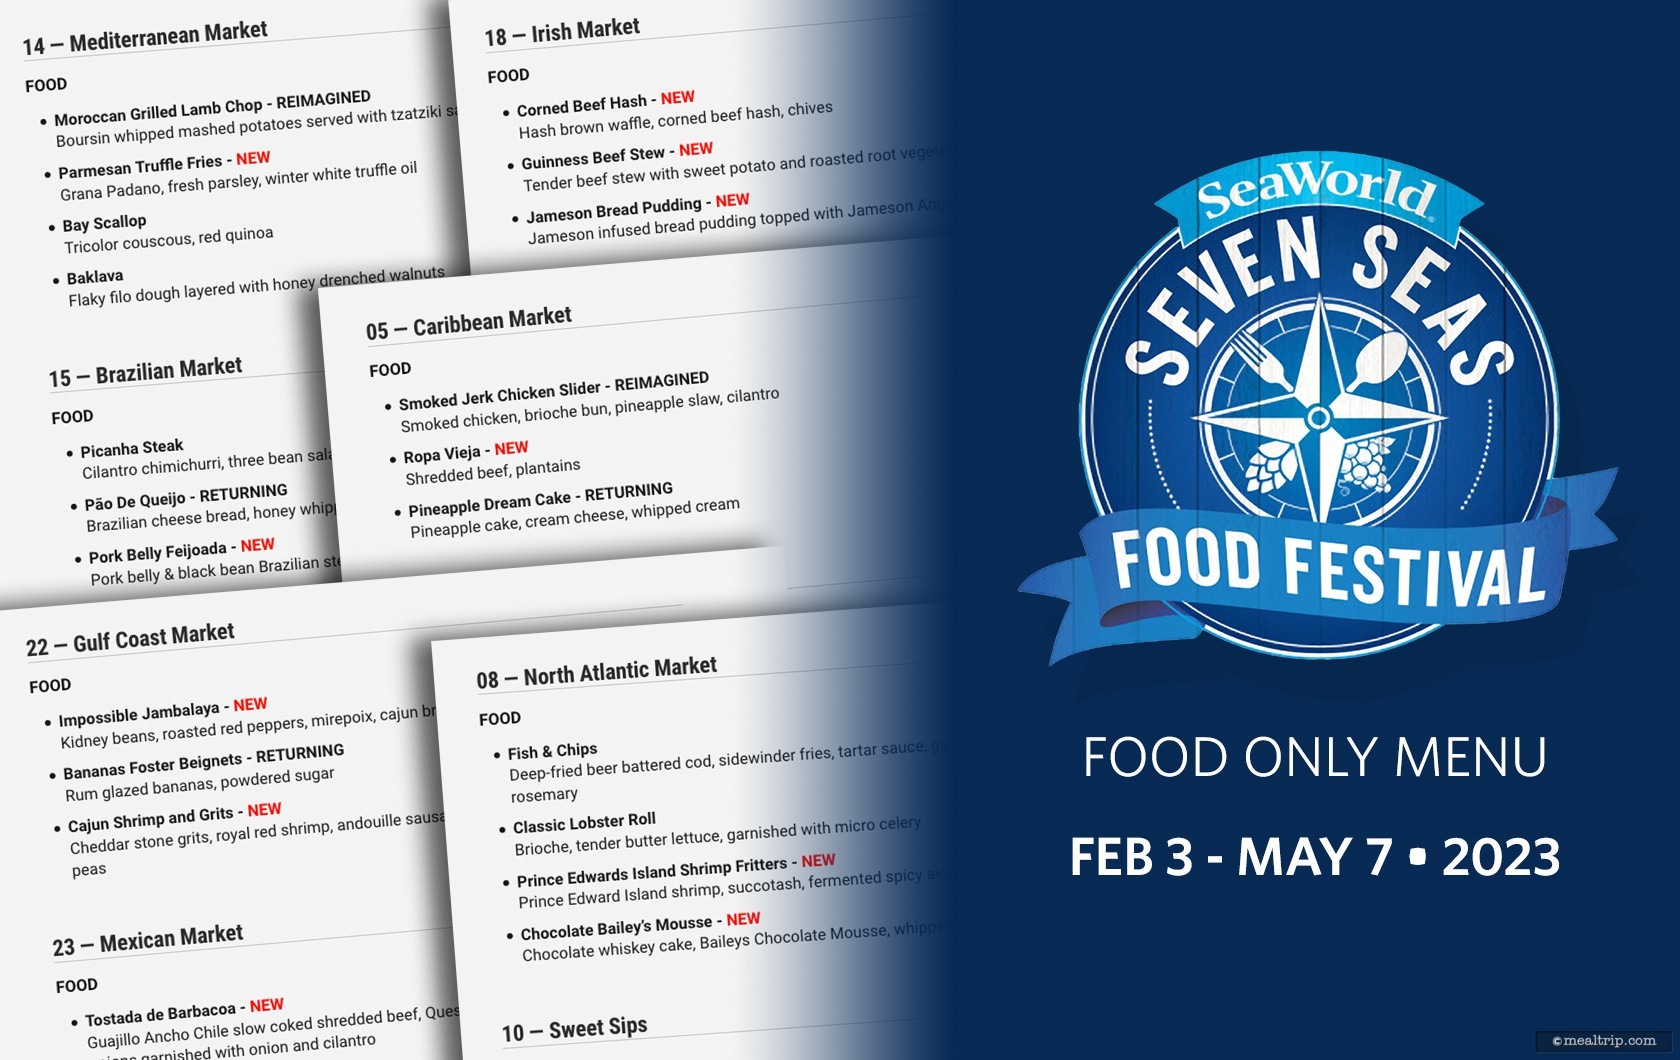 Food Only Menu Items for the 2023 Seven Seas Food Festival at SeaWorld, Orlando